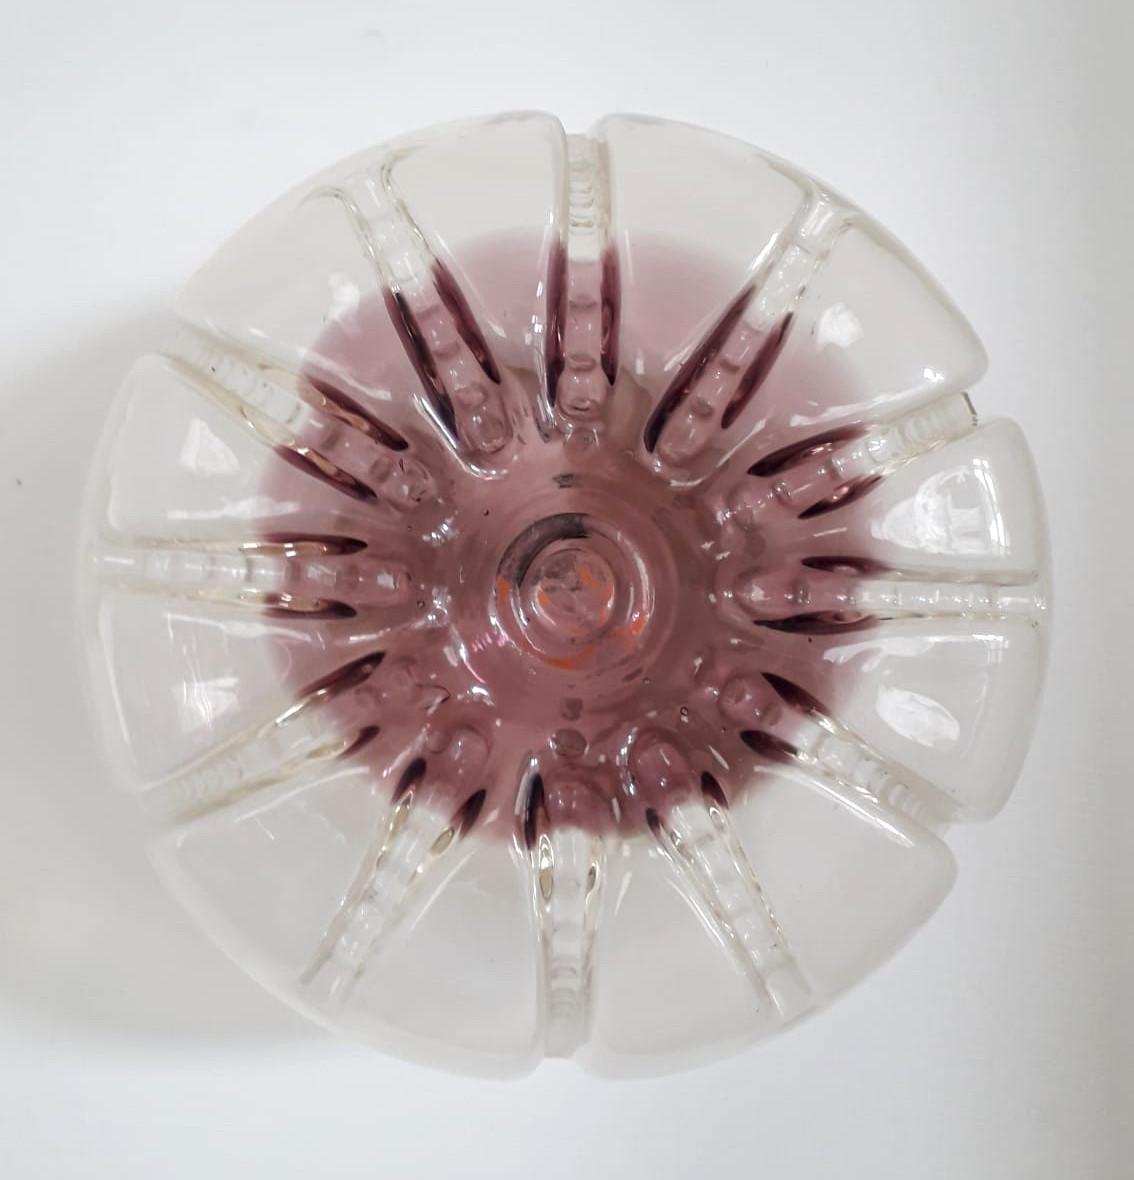 Italian Amethyst Murano Sconce - 3 available For Sale